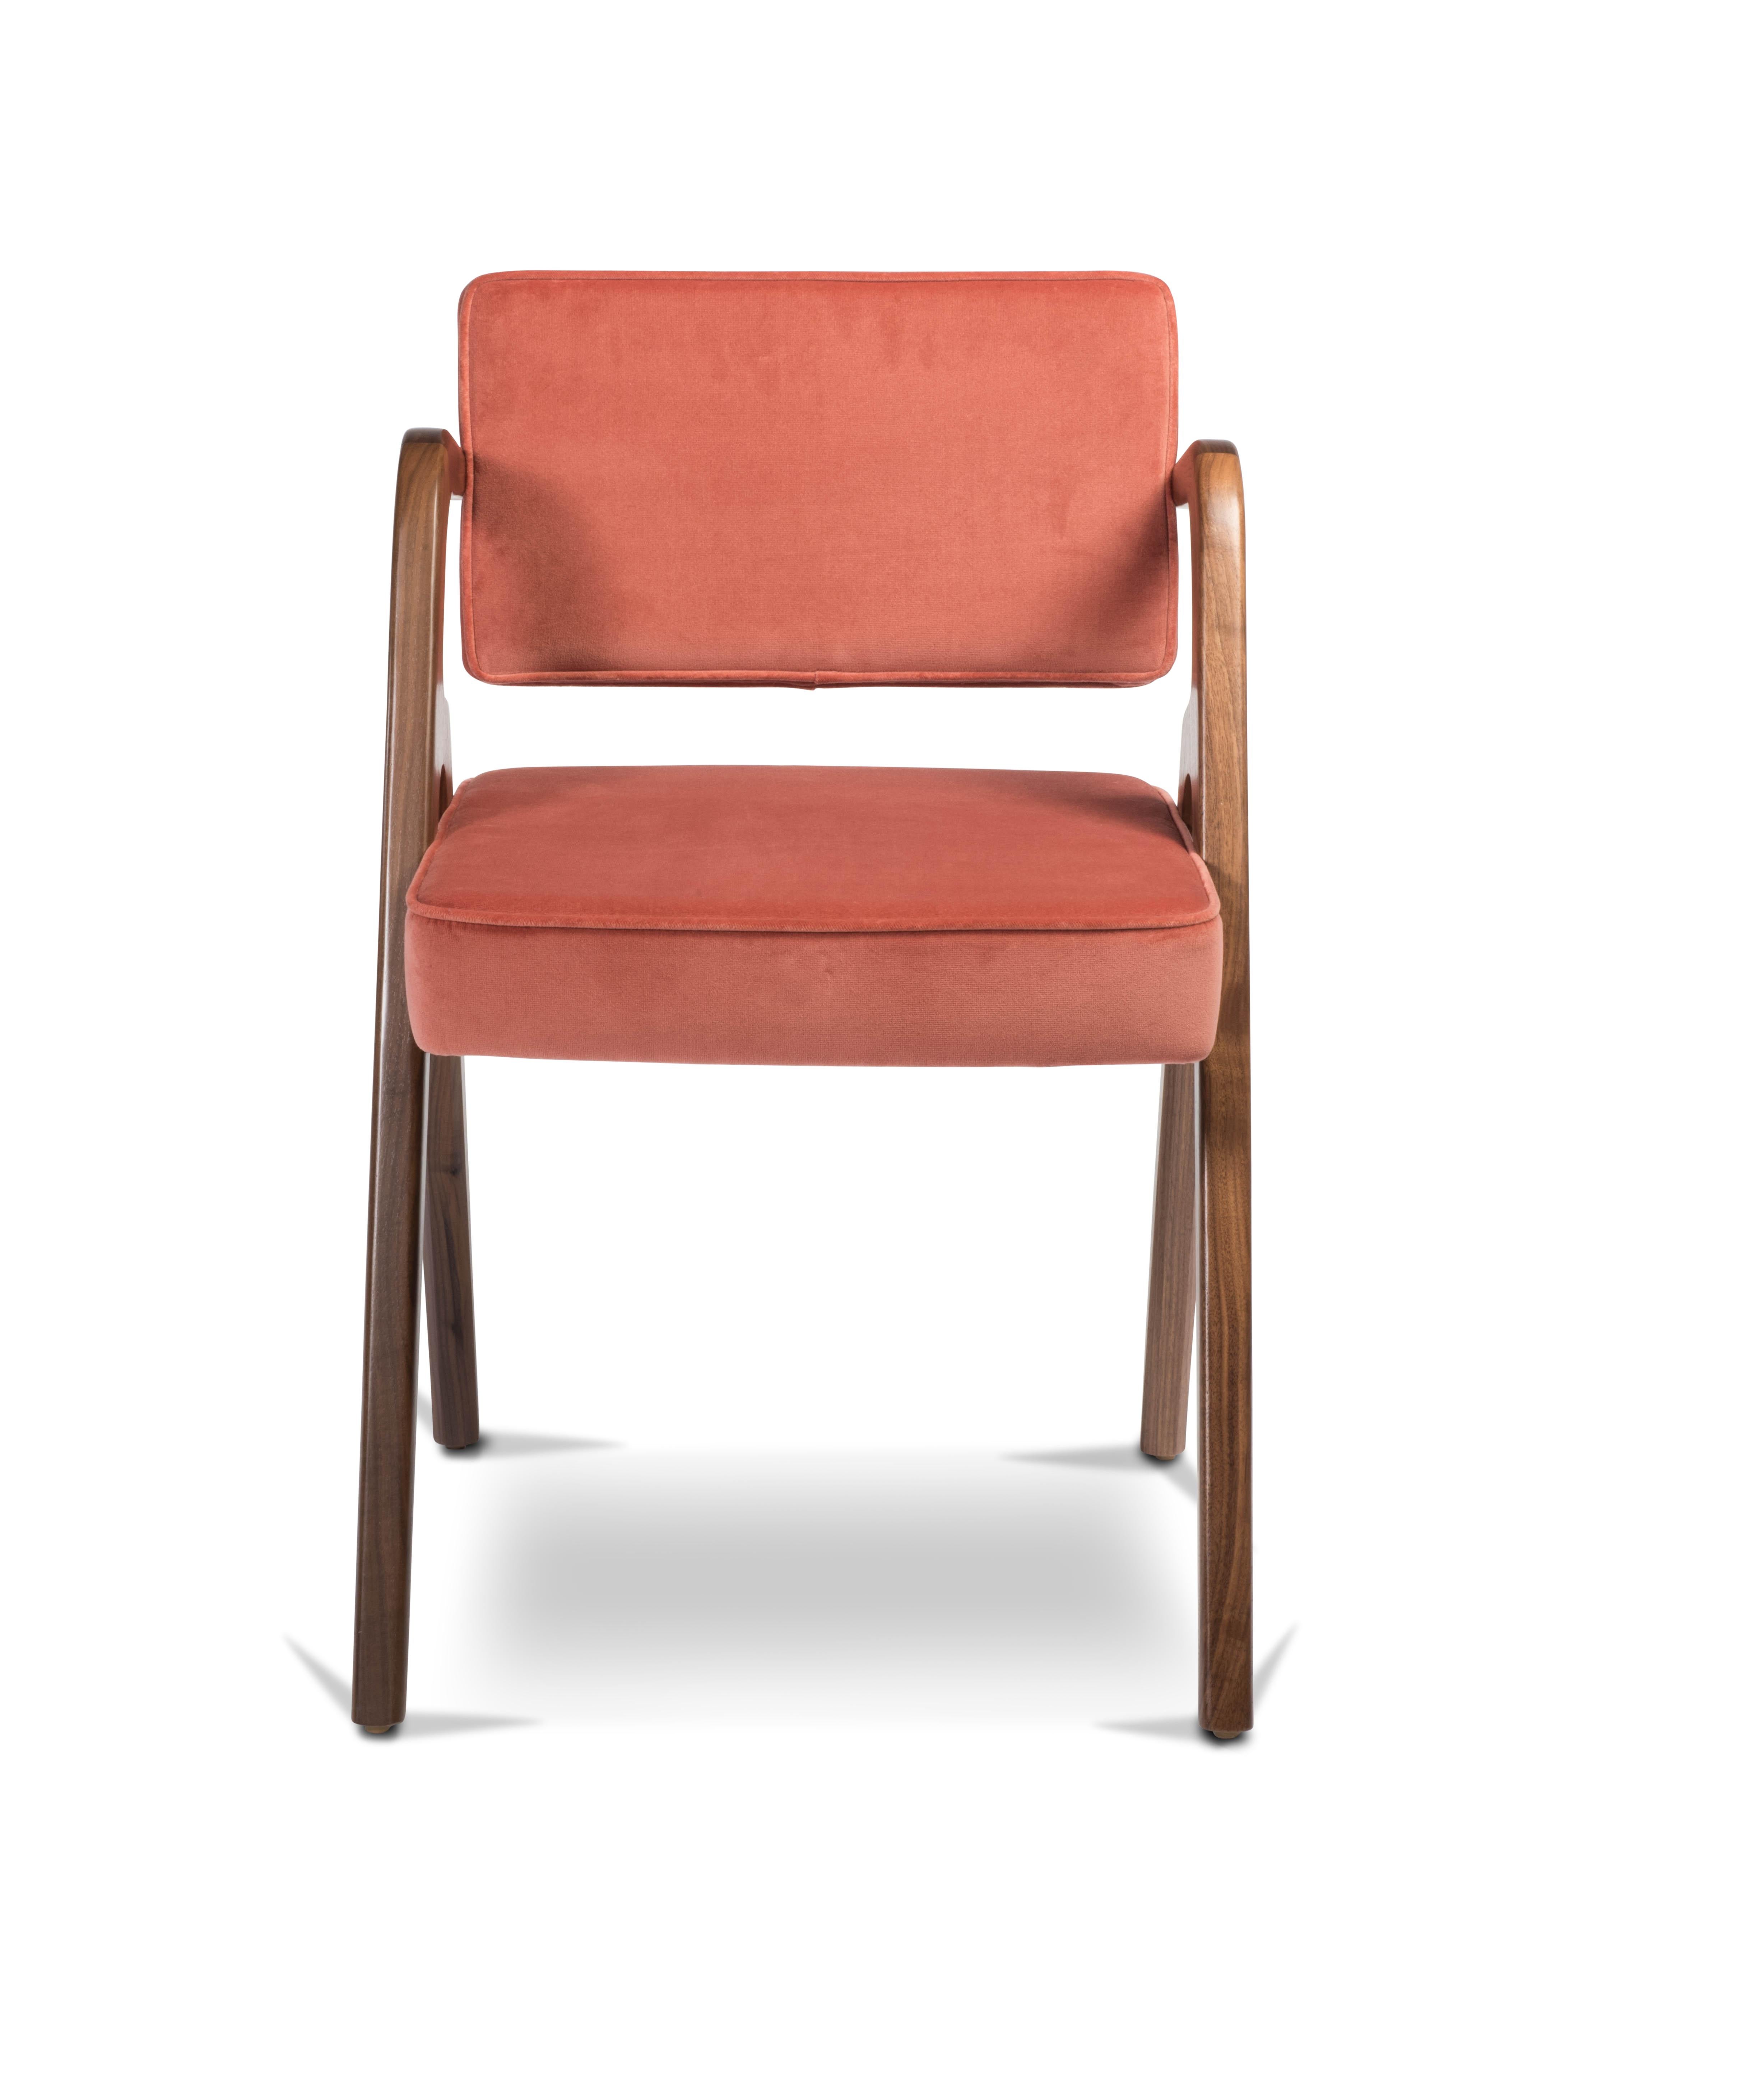 Mid-Century Modern Walnut and Pink Velvet Contemporary Dining Chair by LUTECA, Made to Order